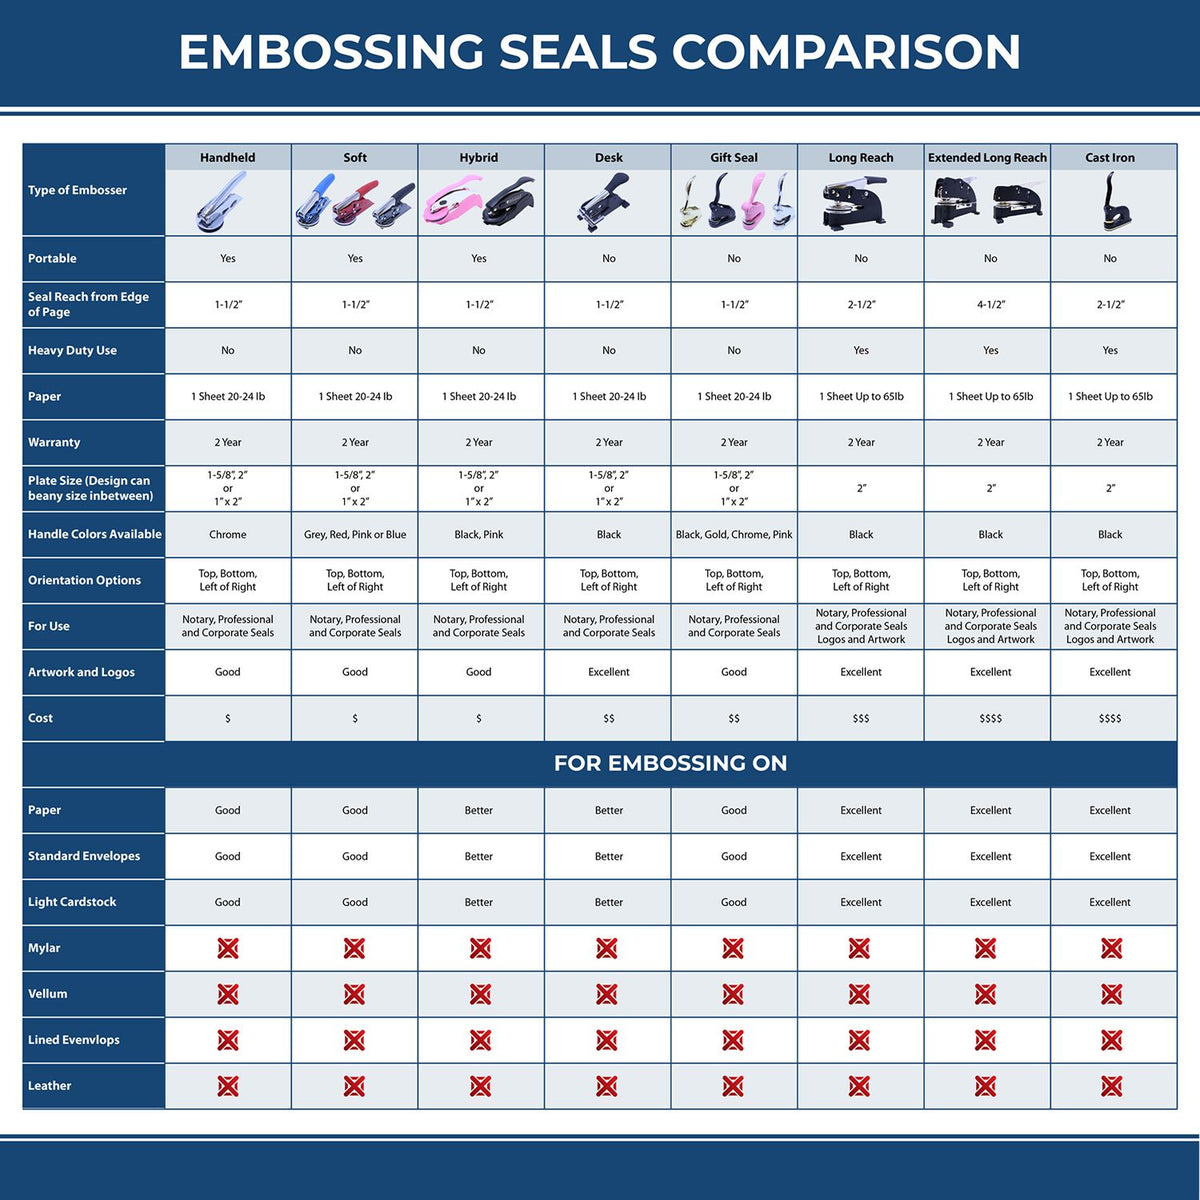 A comparison chart for the different types of mount models available for the Soft Montana Professional Geologist Seal